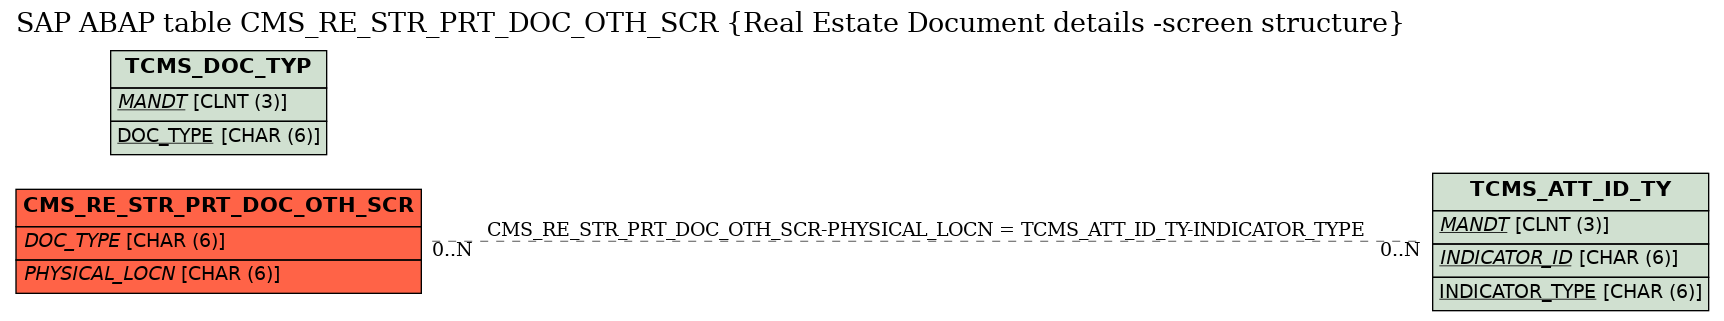 E-R Diagram for table CMS_RE_STR_PRT_DOC_OTH_SCR (Real Estate Document details -screen structure)